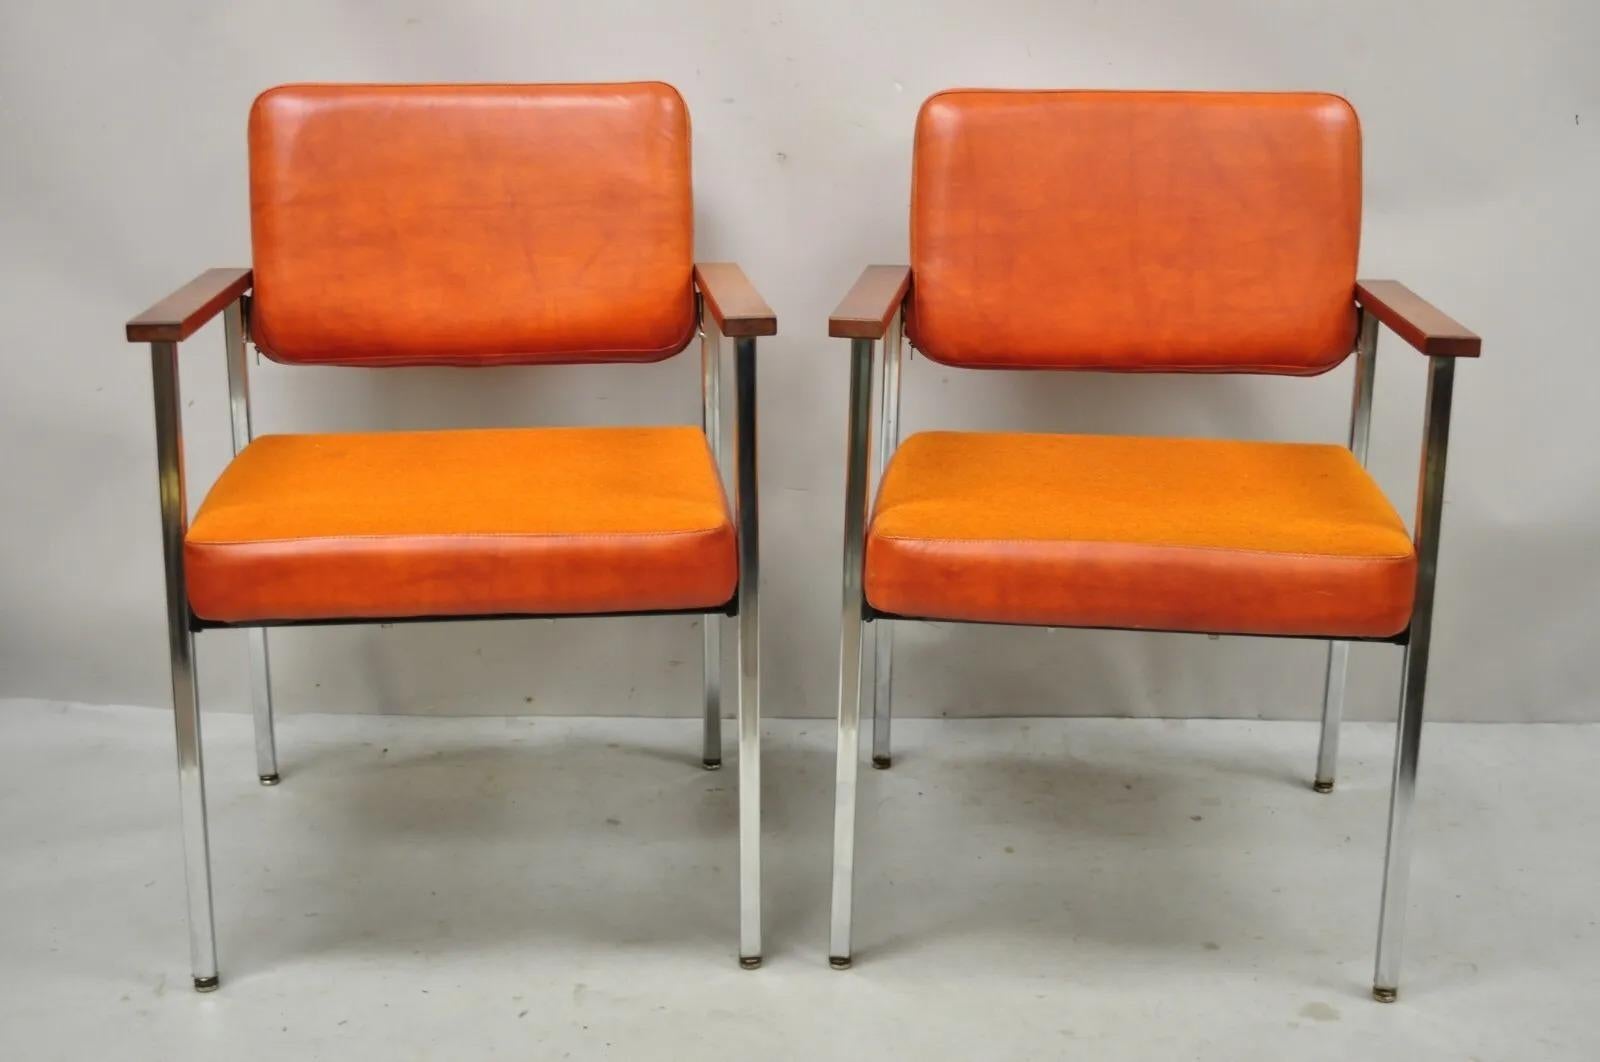 Mid Century Modern orange Naugahyde chrome frame lounge arm chairs by Malibu Ind. Item features chrome metal frame, orange naugahyde and fabric upholstery, solid wood armrest, very nice vintage pair, clean modernist lines, great style and form.